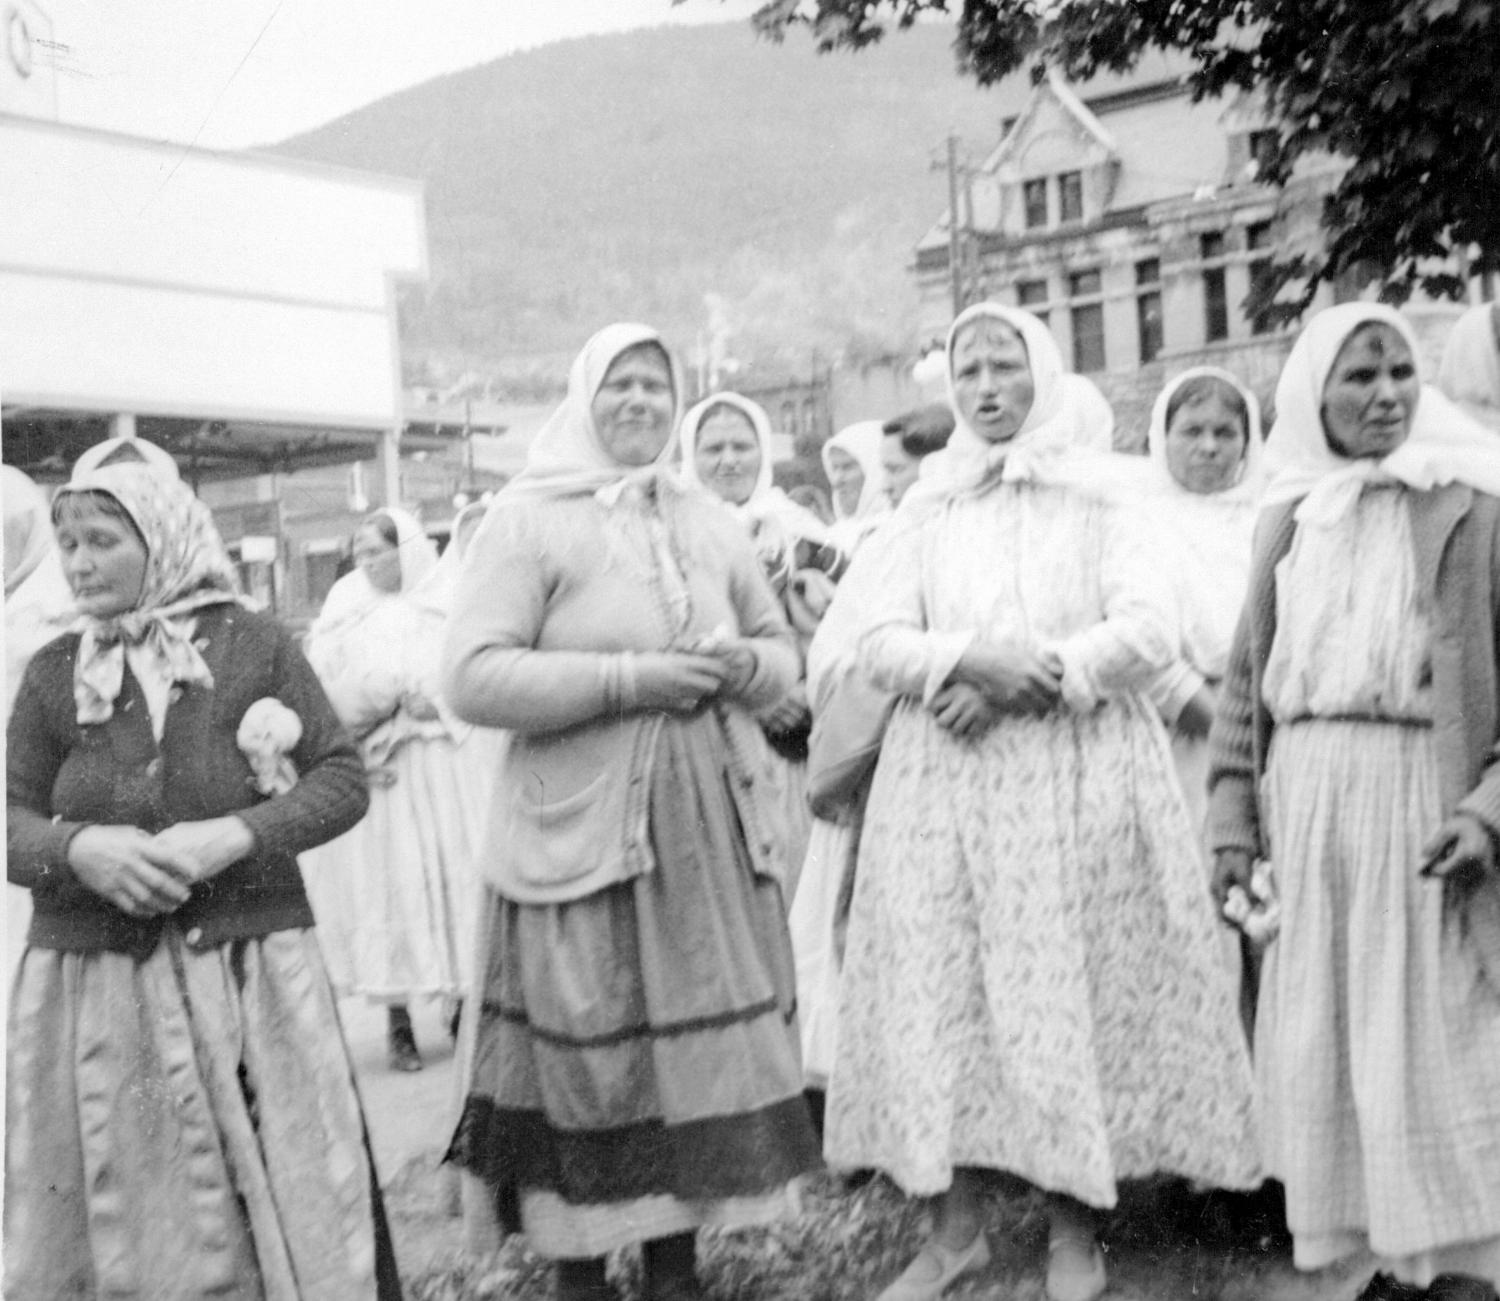 A group of Doukhobor women, believed to be in Nelson